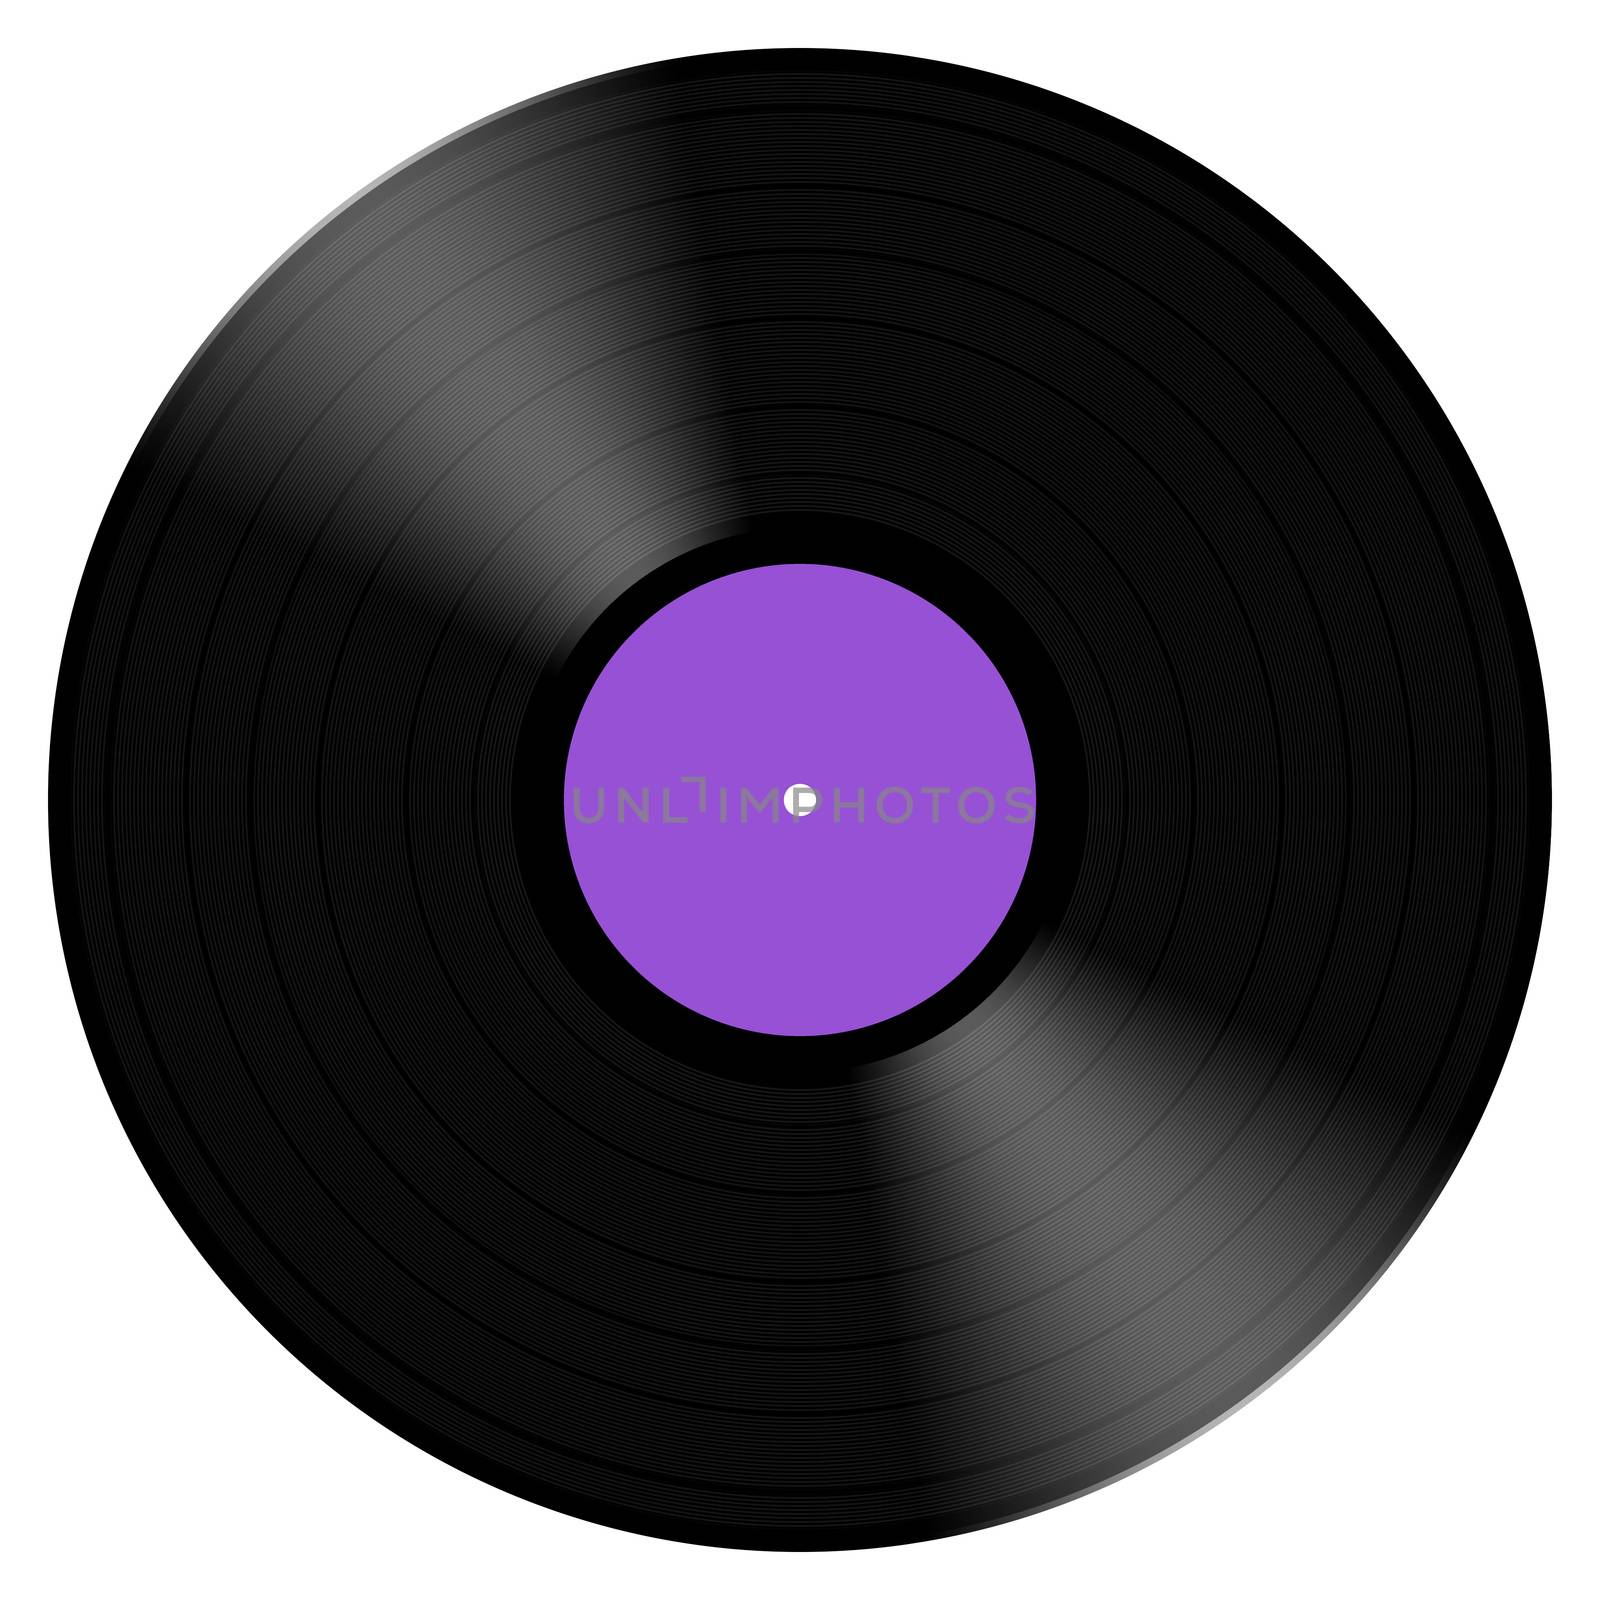 2d illustration of a typical vinyl record